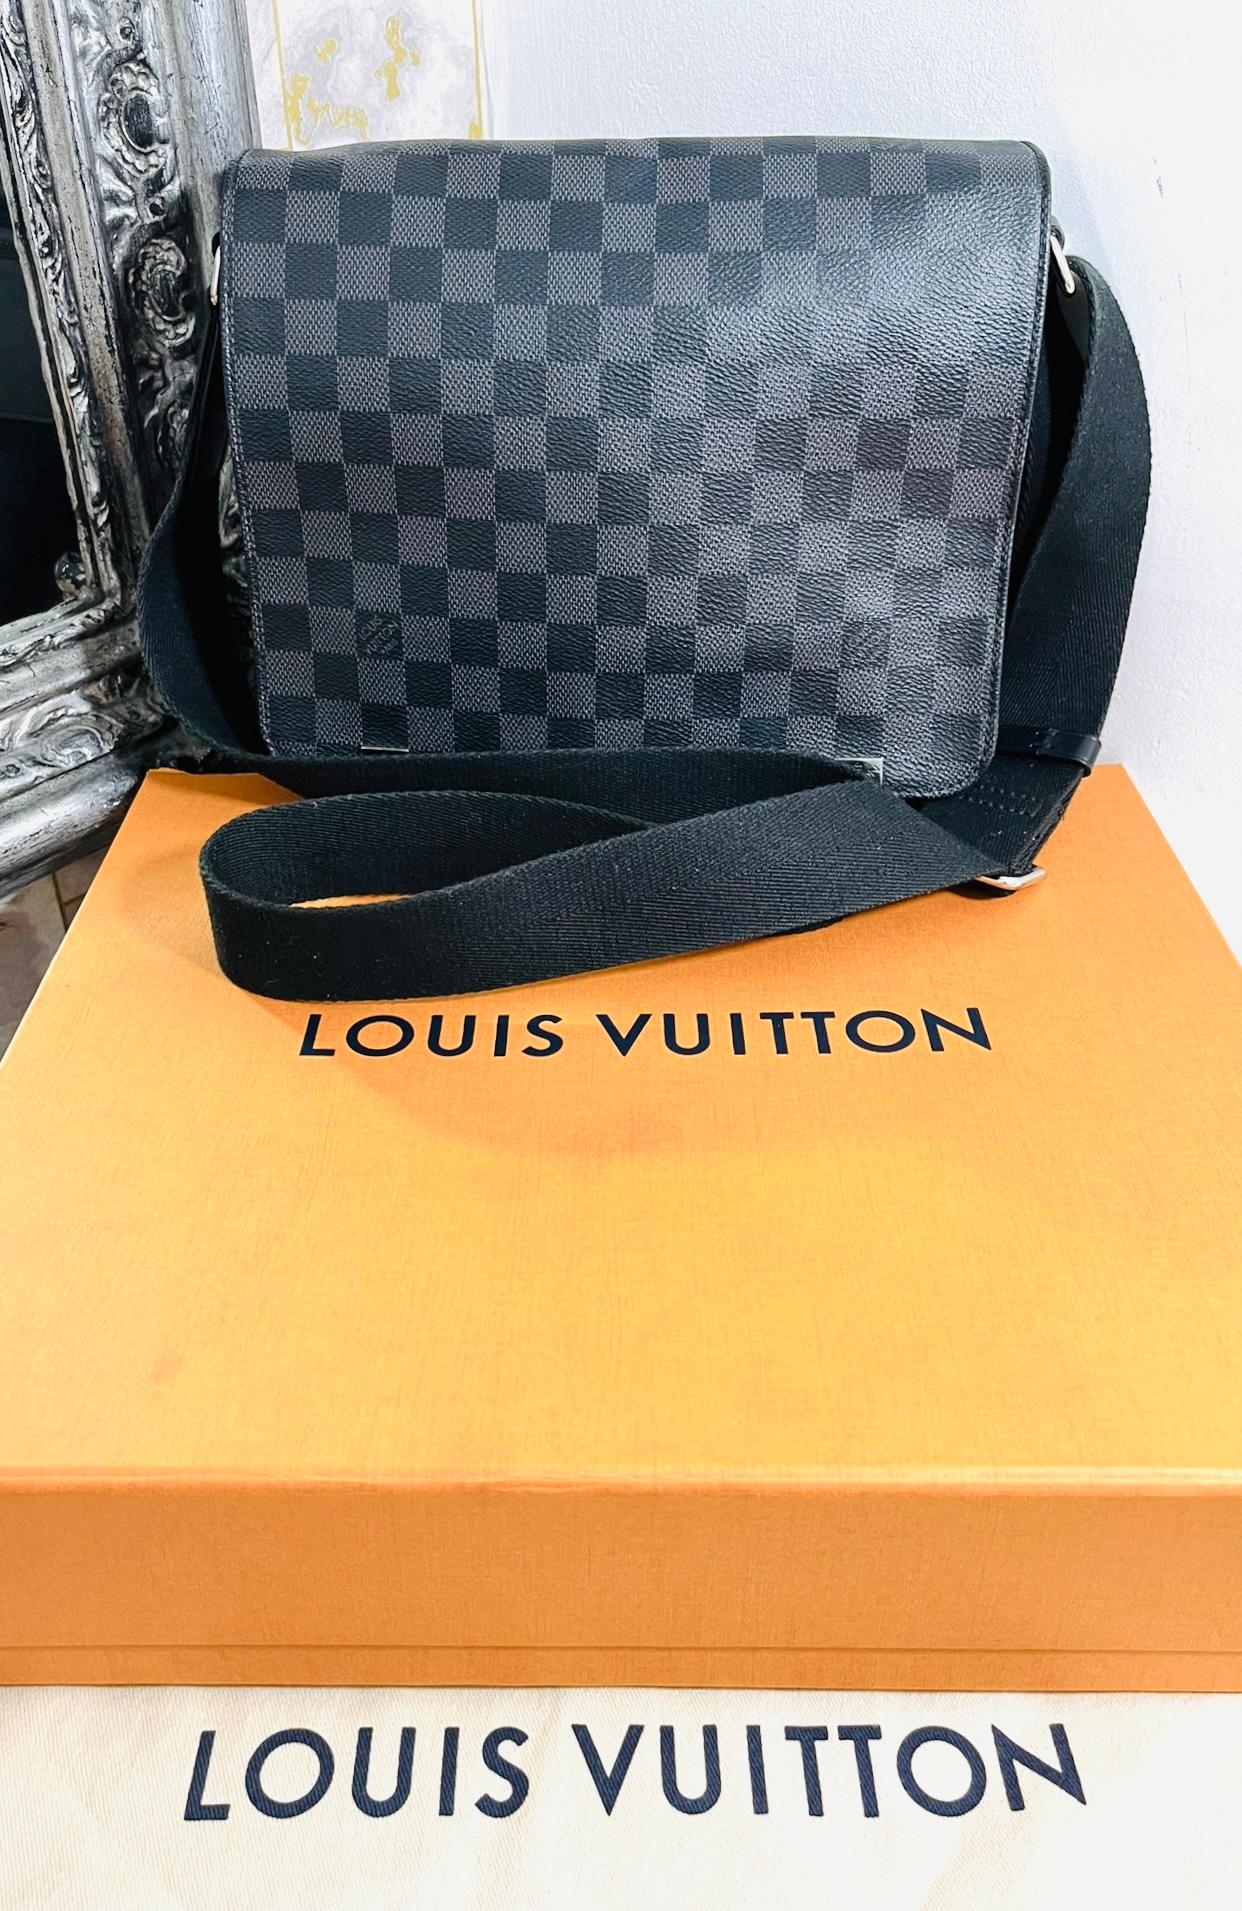 Louis Vuitton District PM Messenger Bag

Rectangle shaped bag crafted in Damier Graphite coated canvas.

Detailed with two silver 'Louis Vuitton Paris' engraved plaques to the front.

Featuring flap magnetic closure and wide, adjustable shoulder